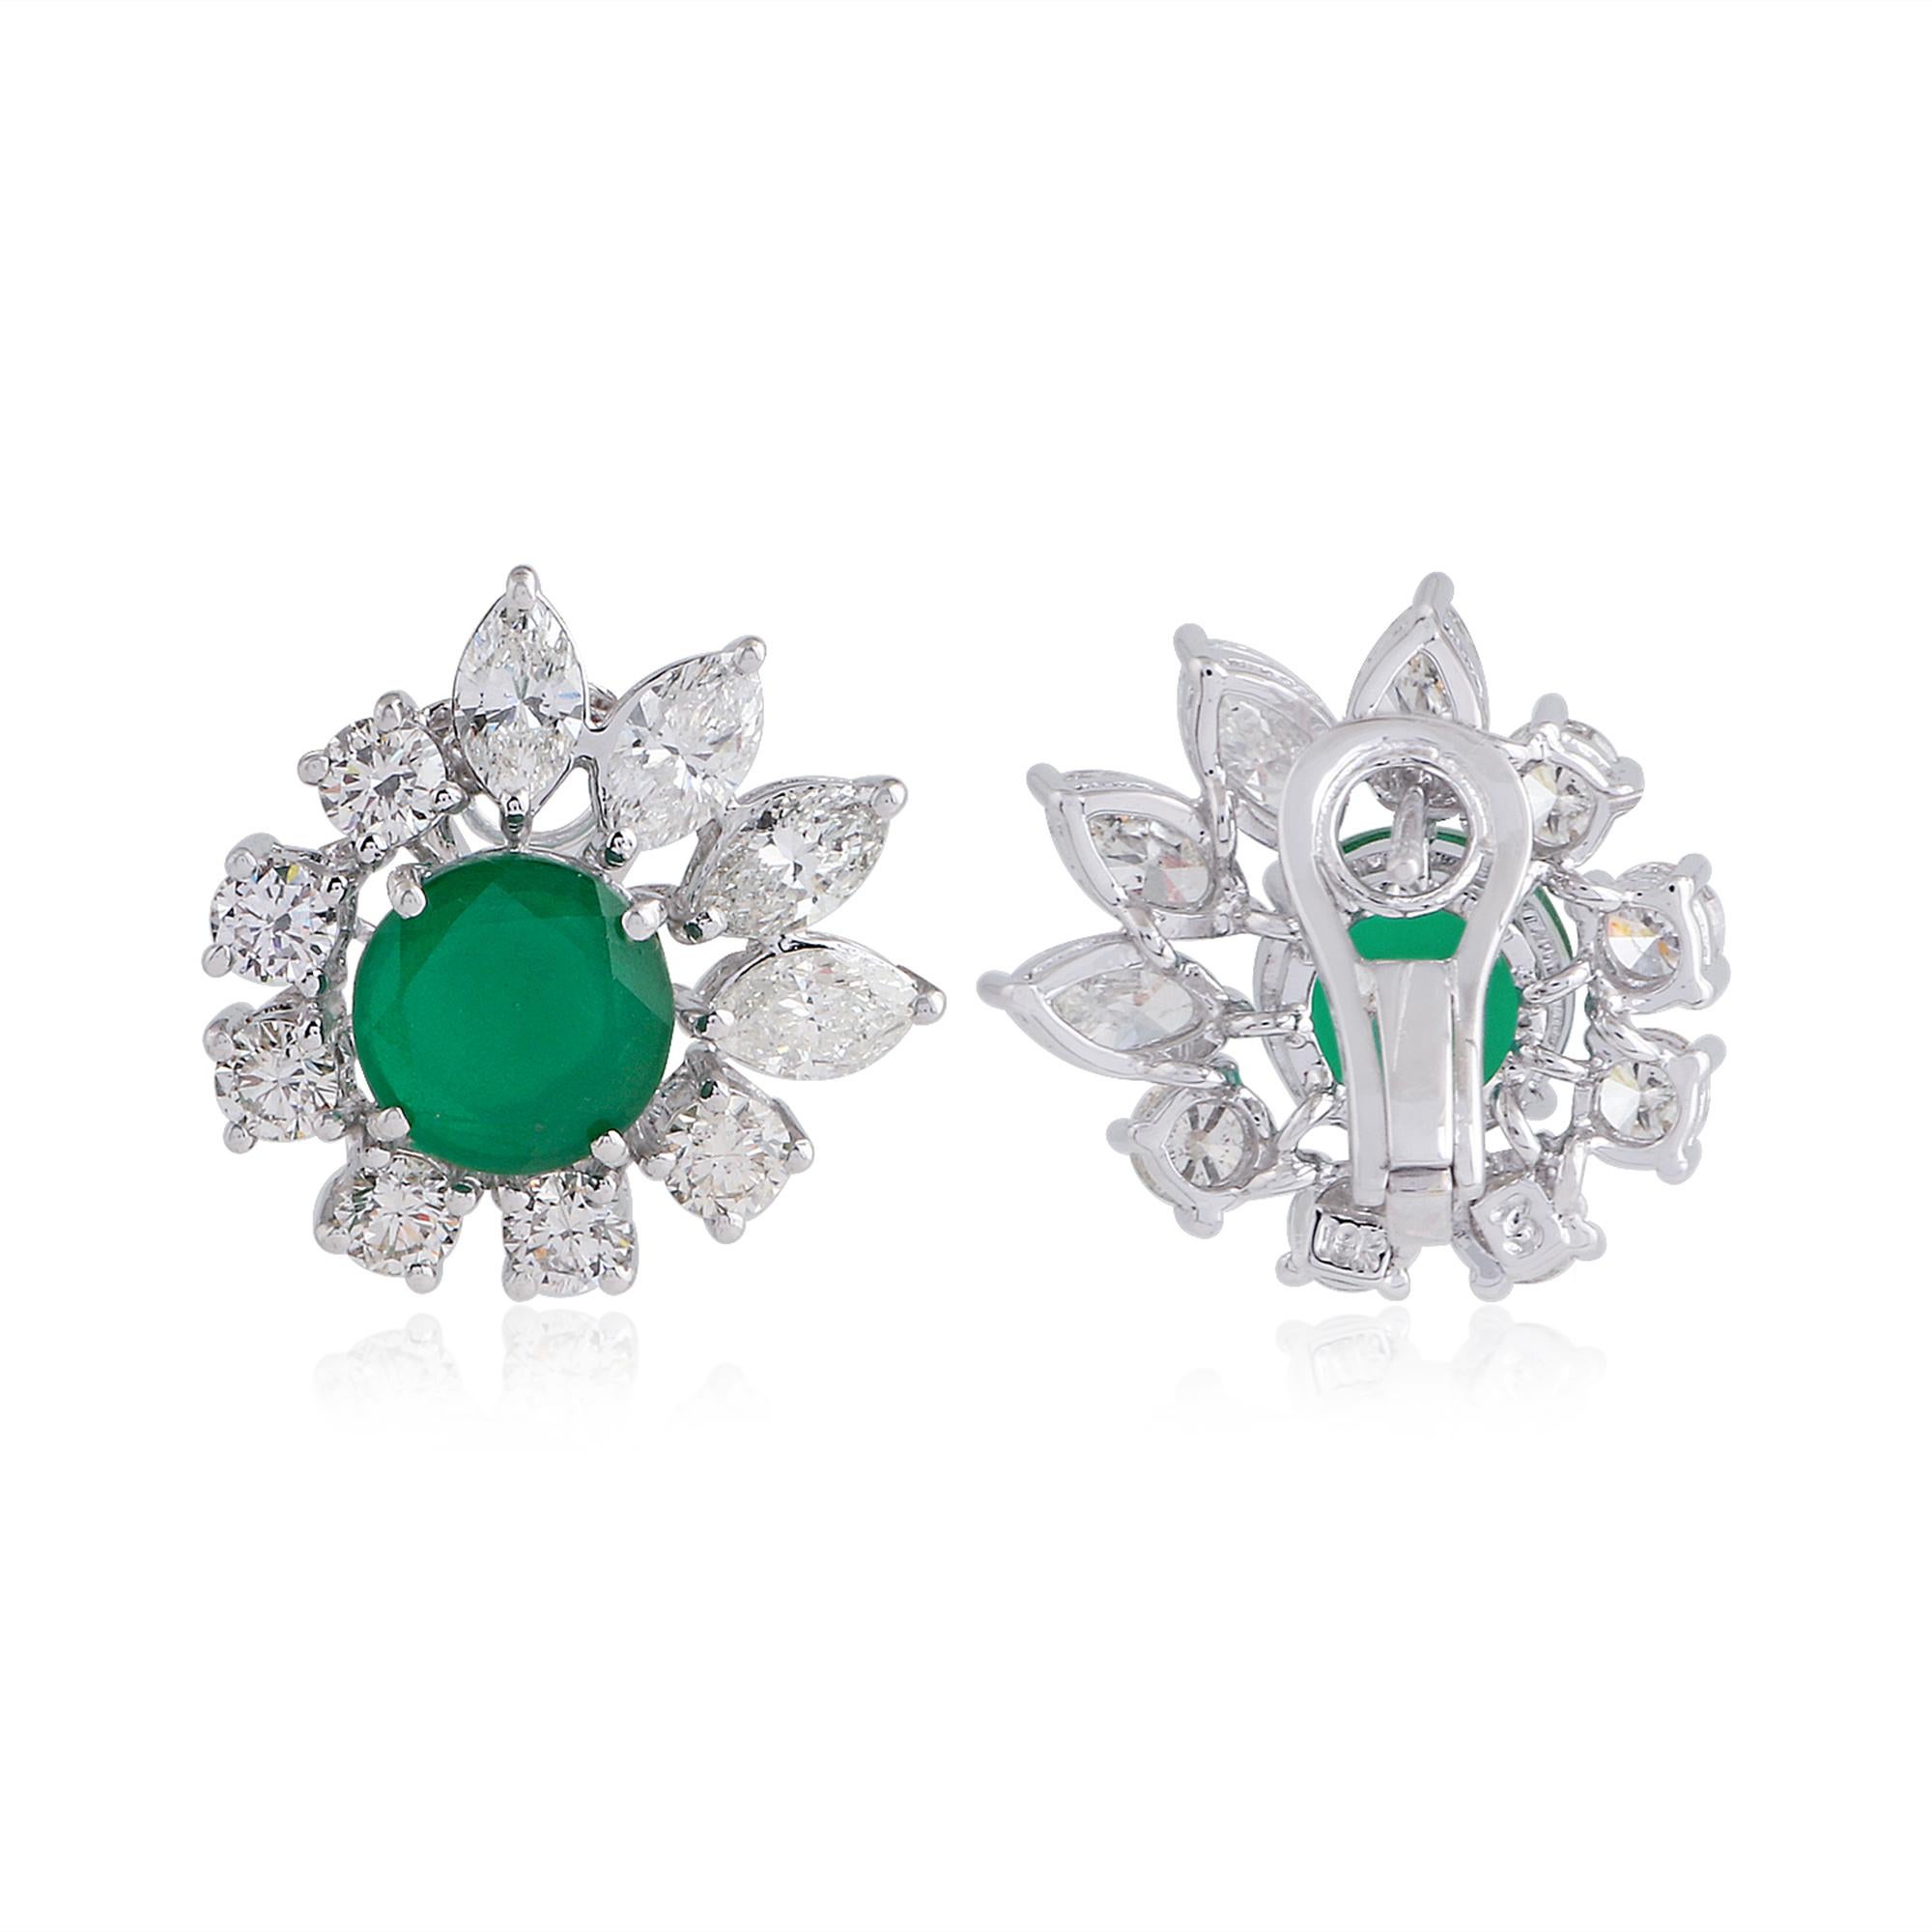 Item Code :- CN-40136
Gross Wt. :- 12.78 gm
18k White Gold Wt. :- 10.71 gm
Diamond Wt. :- 5.15 Ct. ( AVERAGE DIAMOND CLARITY SI1-SI2 & COLOR H-I )
Emerald Wt. :- 5.22 Ct. 

≫ FAQ below for more detail.

✦ Sizing
.....................
We can adjust